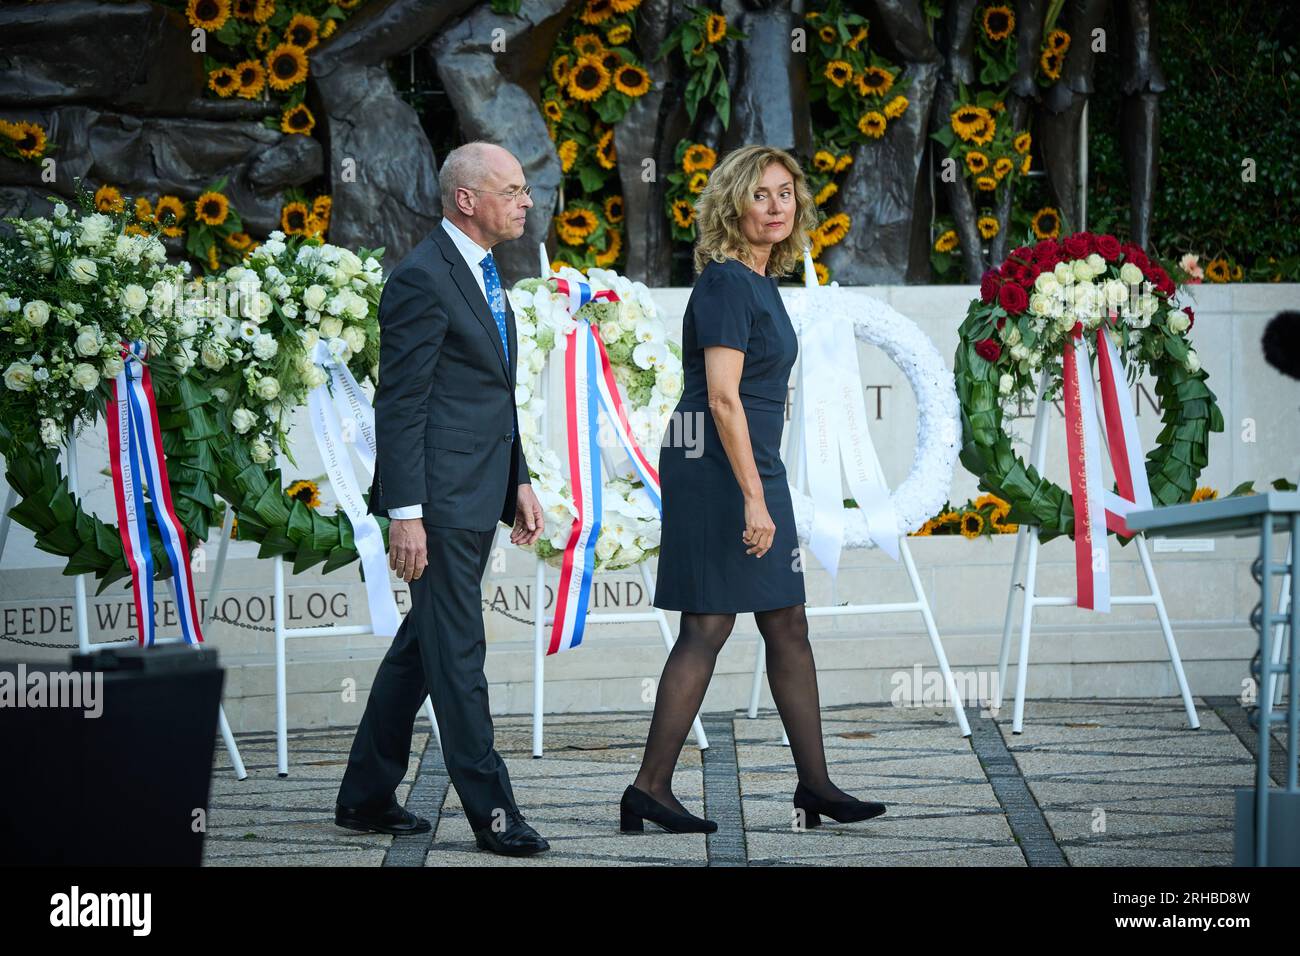 THE HAGUE - President of the House of Representatives, Vera Bergkamp and the President of the Senate, Jan Anthonie Bruijn at the Indisch Monument during the National Commemoration of the capitulation of Japan on August 15, 1945. The Stichting Nationale Herdenking 15 Augustus 1945 annually organizes this commemoration in which all victims of the war against Japan and the Japanese occupation of the former Dutch East Indies are commemorated. ANP PHIL NIJHUIS netherlands out - belgium out Stock Photo